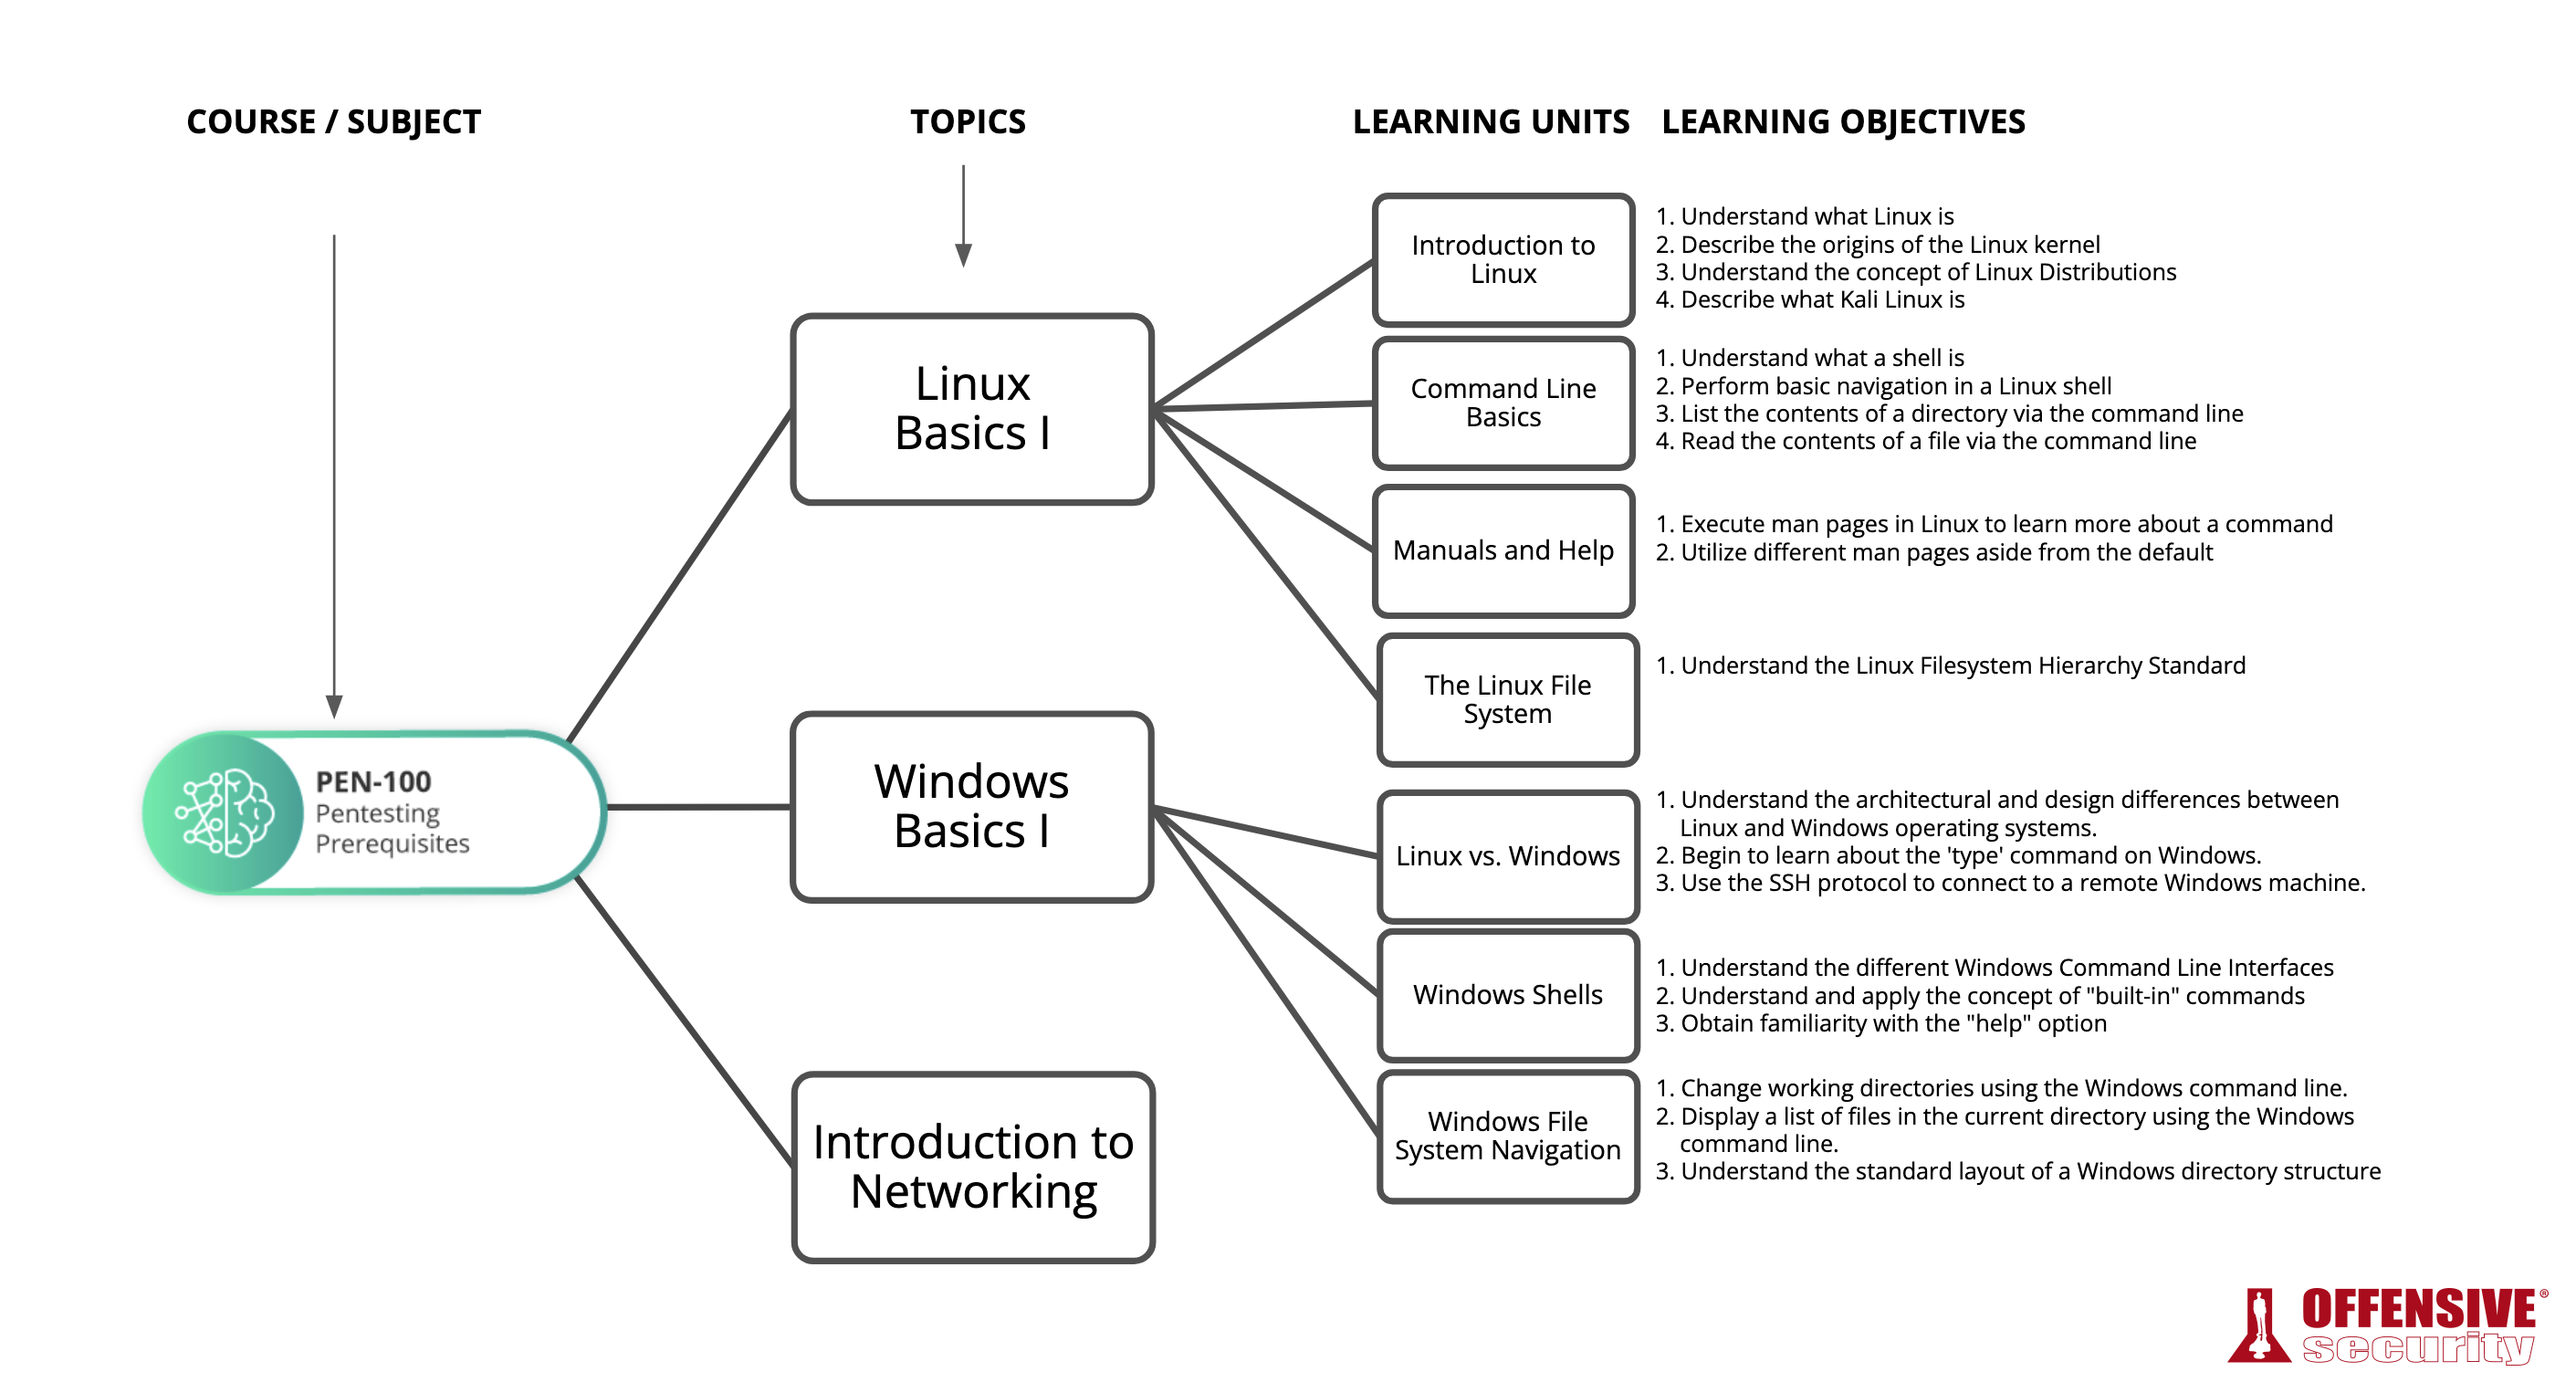 Topic - Learning Unit - Learning Objective structure